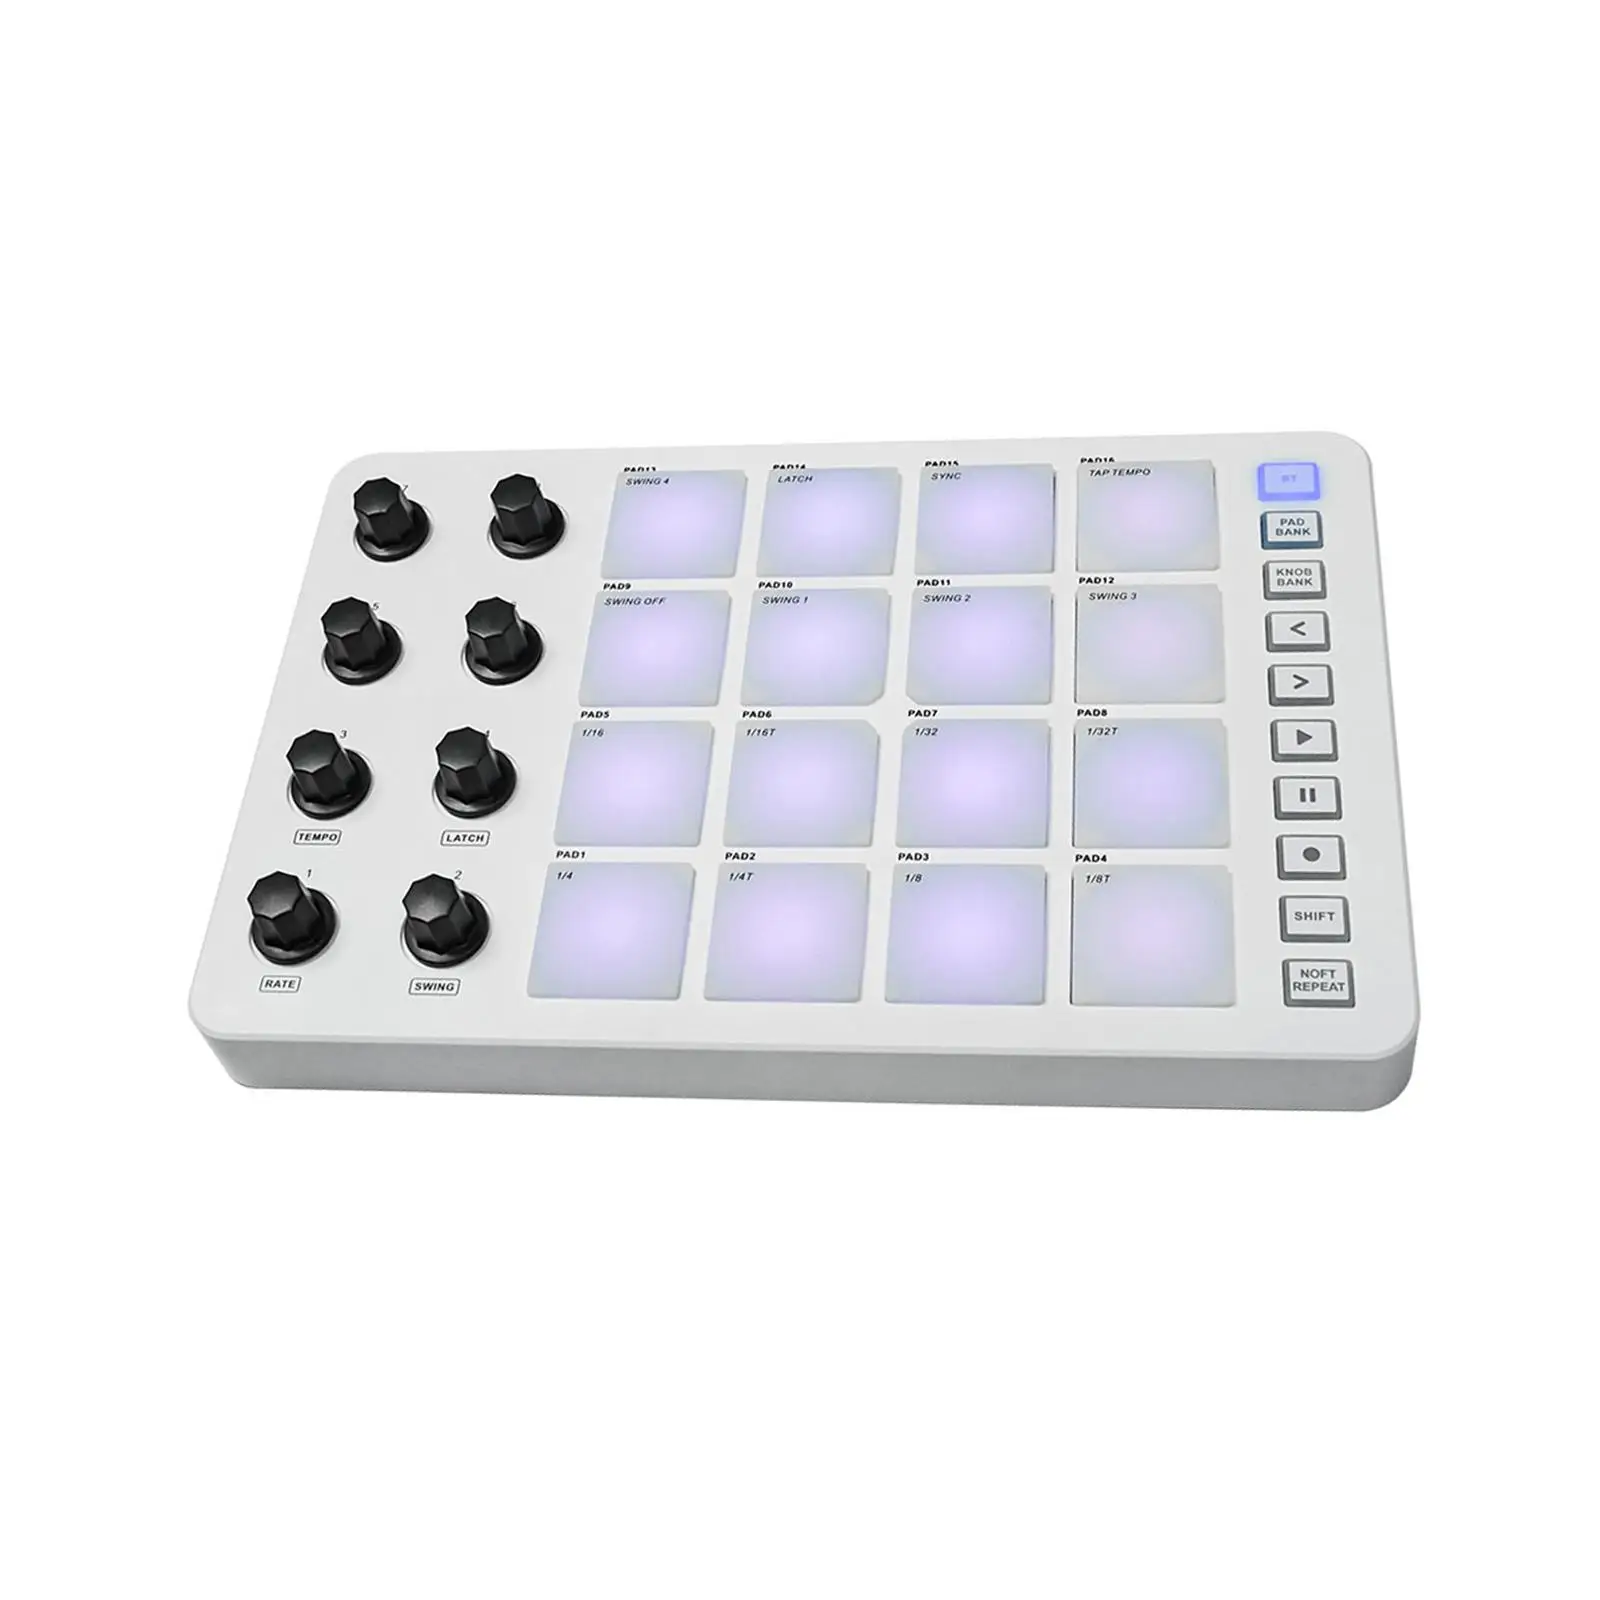 

MIDI Keyboard Portable USB 5 Assignable Knobs with 16 Backlit Drum Pad MIDI Pad Beat Maker Machine for Music Production Beginner